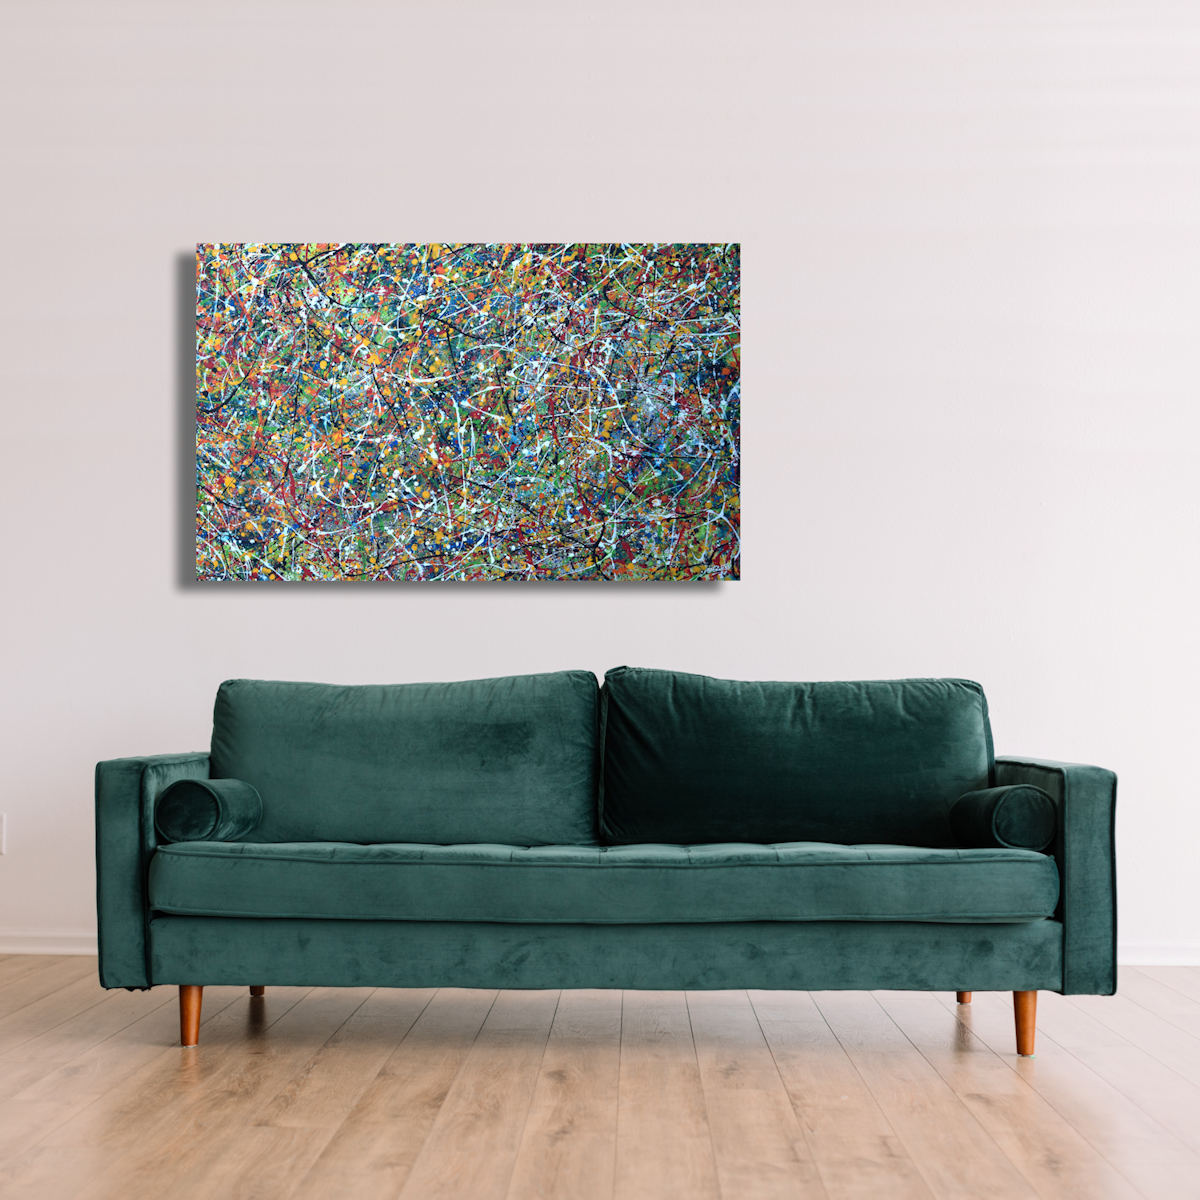 Colourful abstract painting